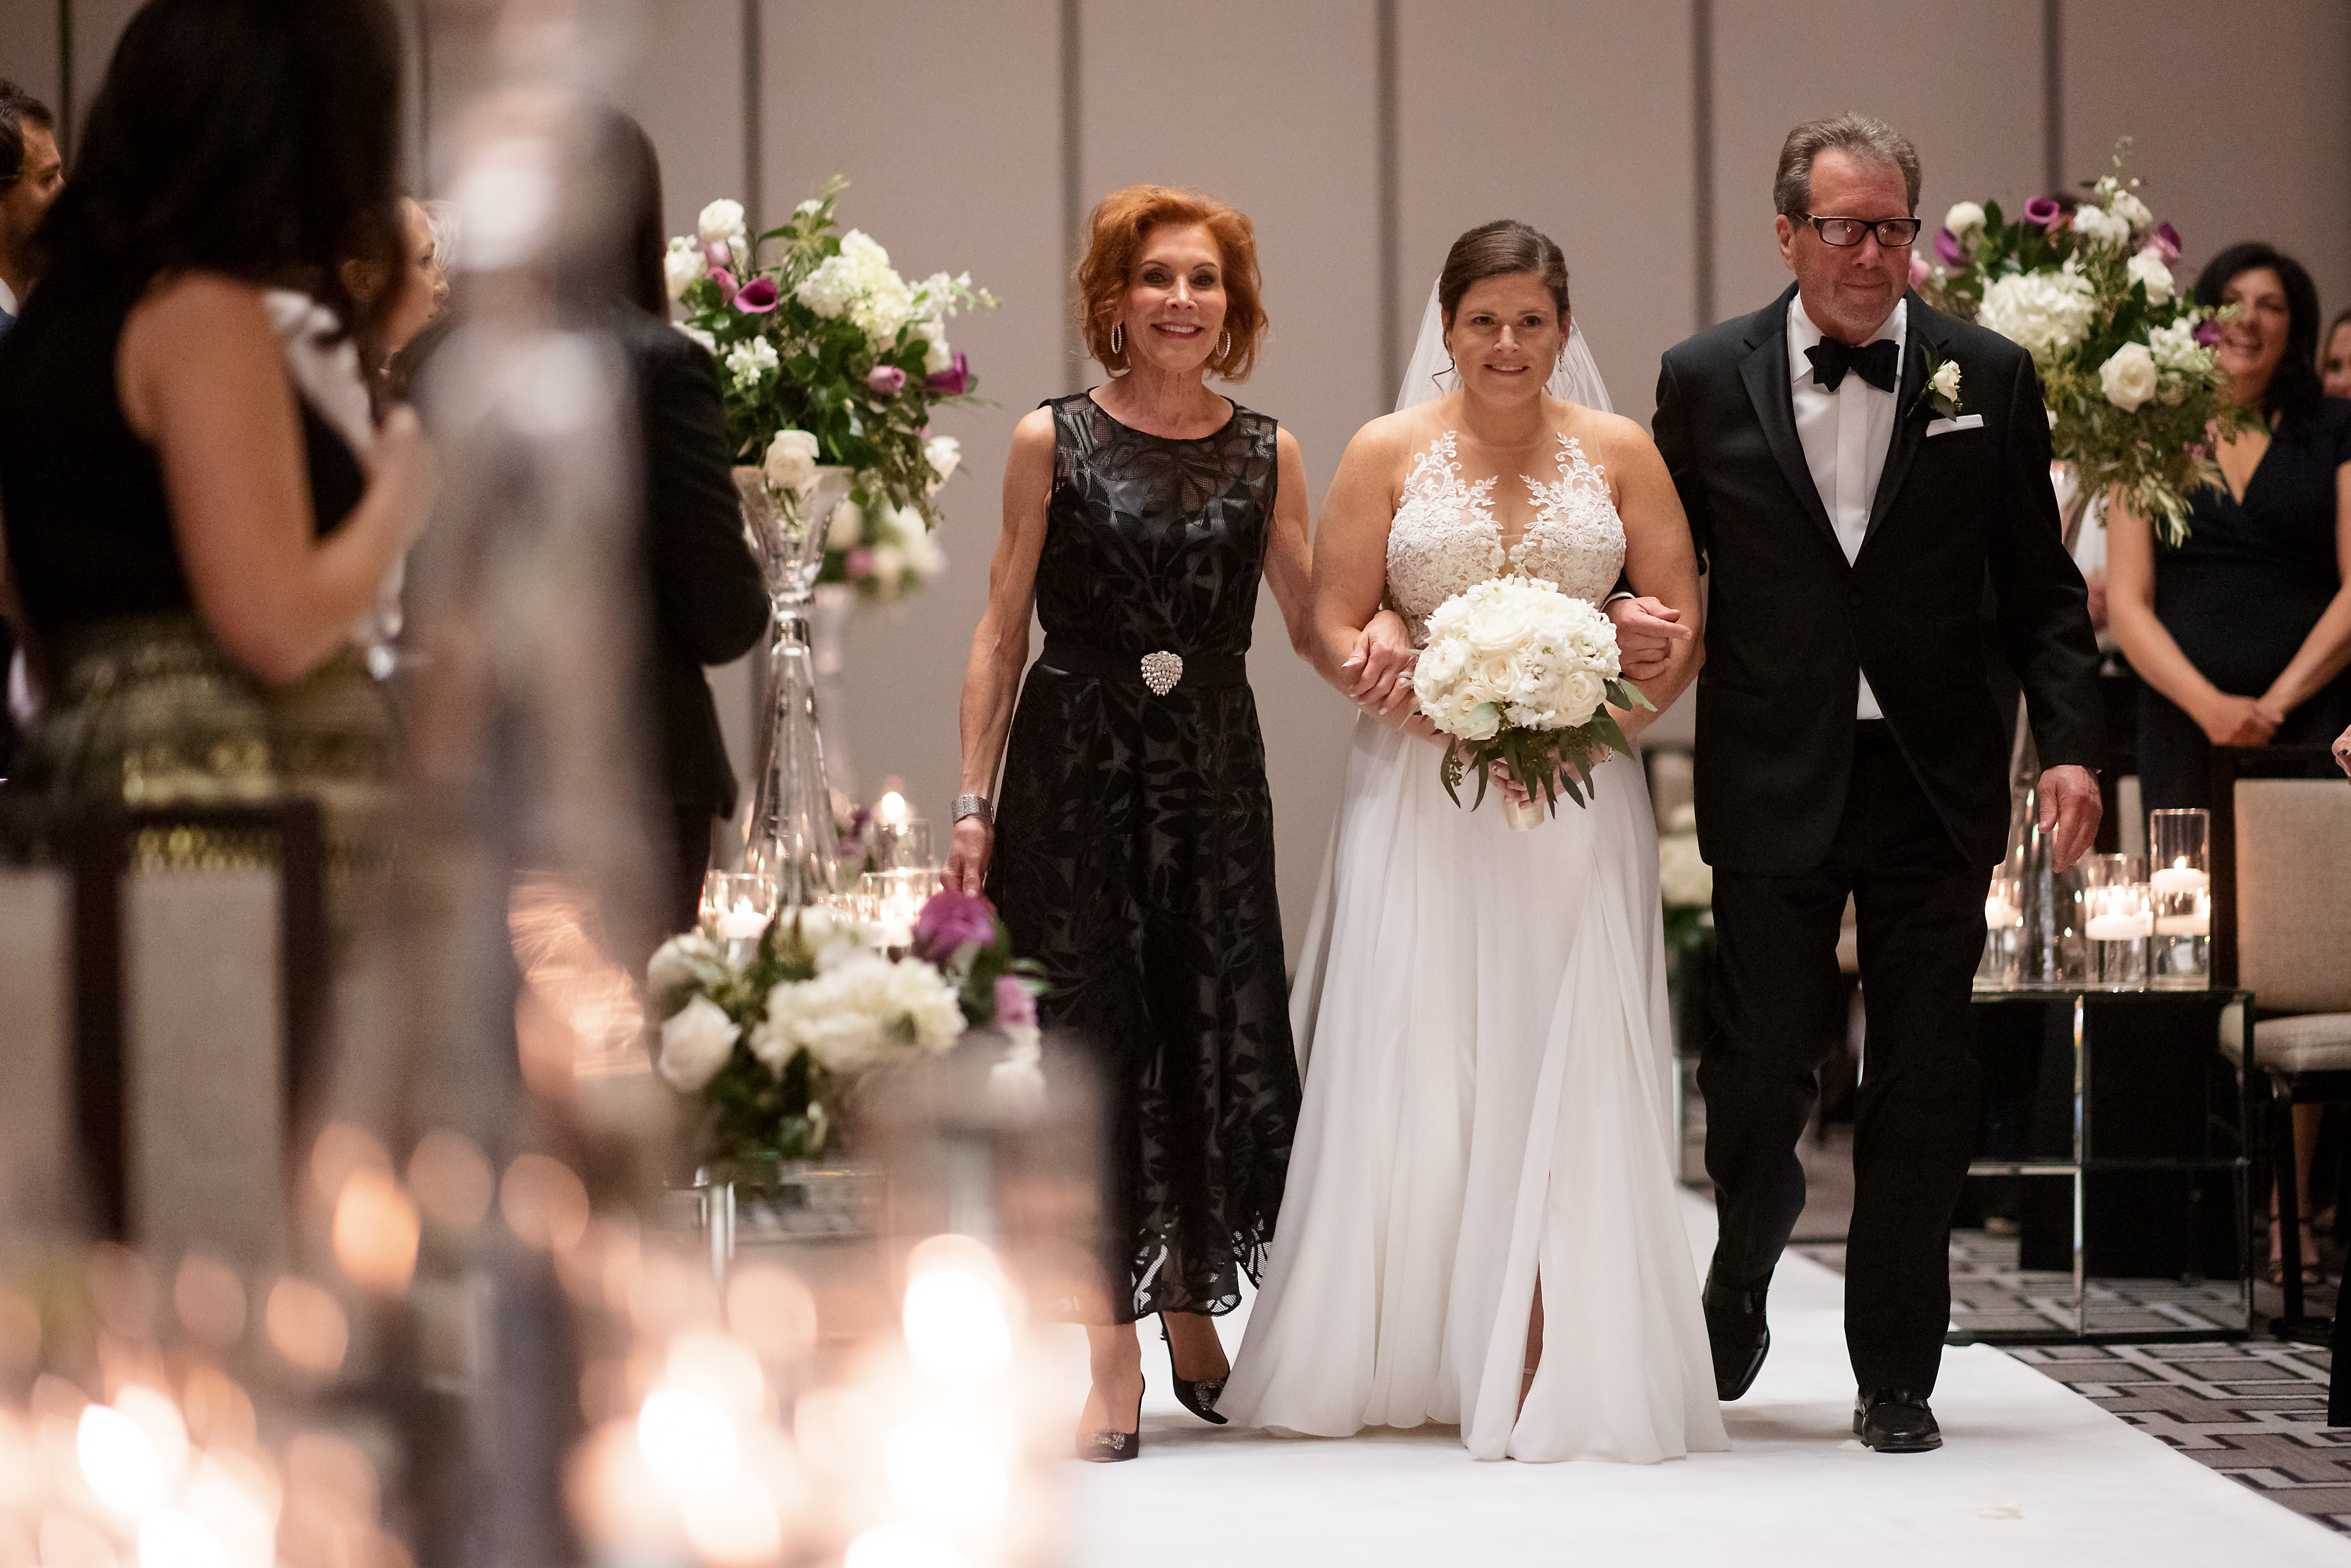 Bride walks down the aisle with her parents during wedding ceremony at The Langham Hotel in downtown Chicago